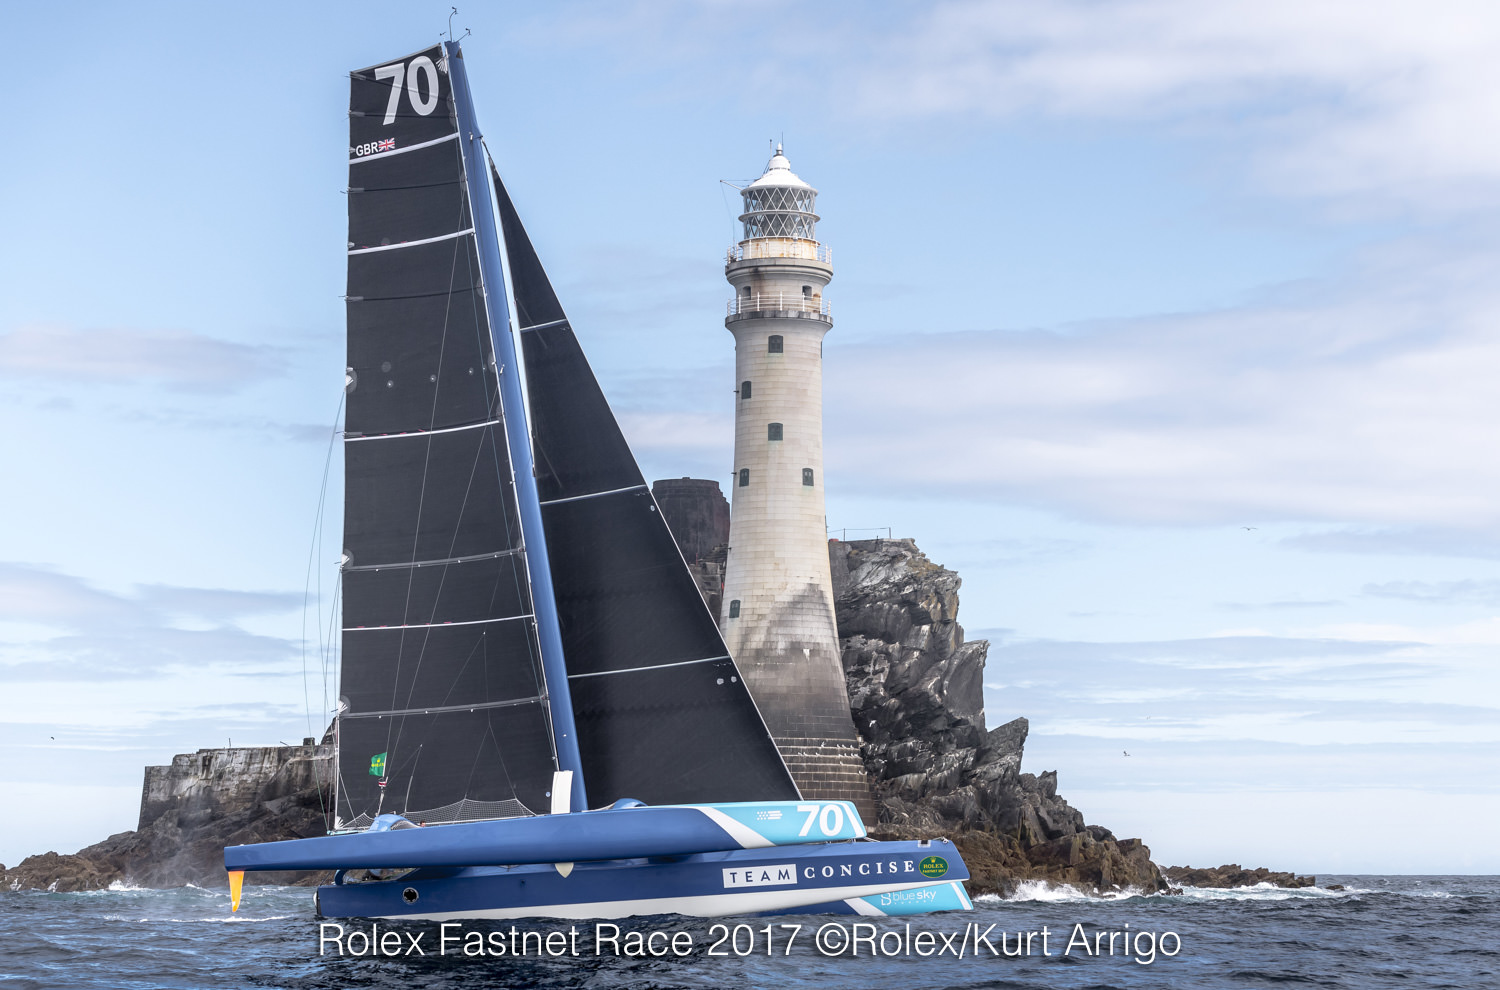  IRC, ORC, Open 60, VOR65, Class 40  Fastnet Race 2017  Cowes GBR  Day 2, the Swiss